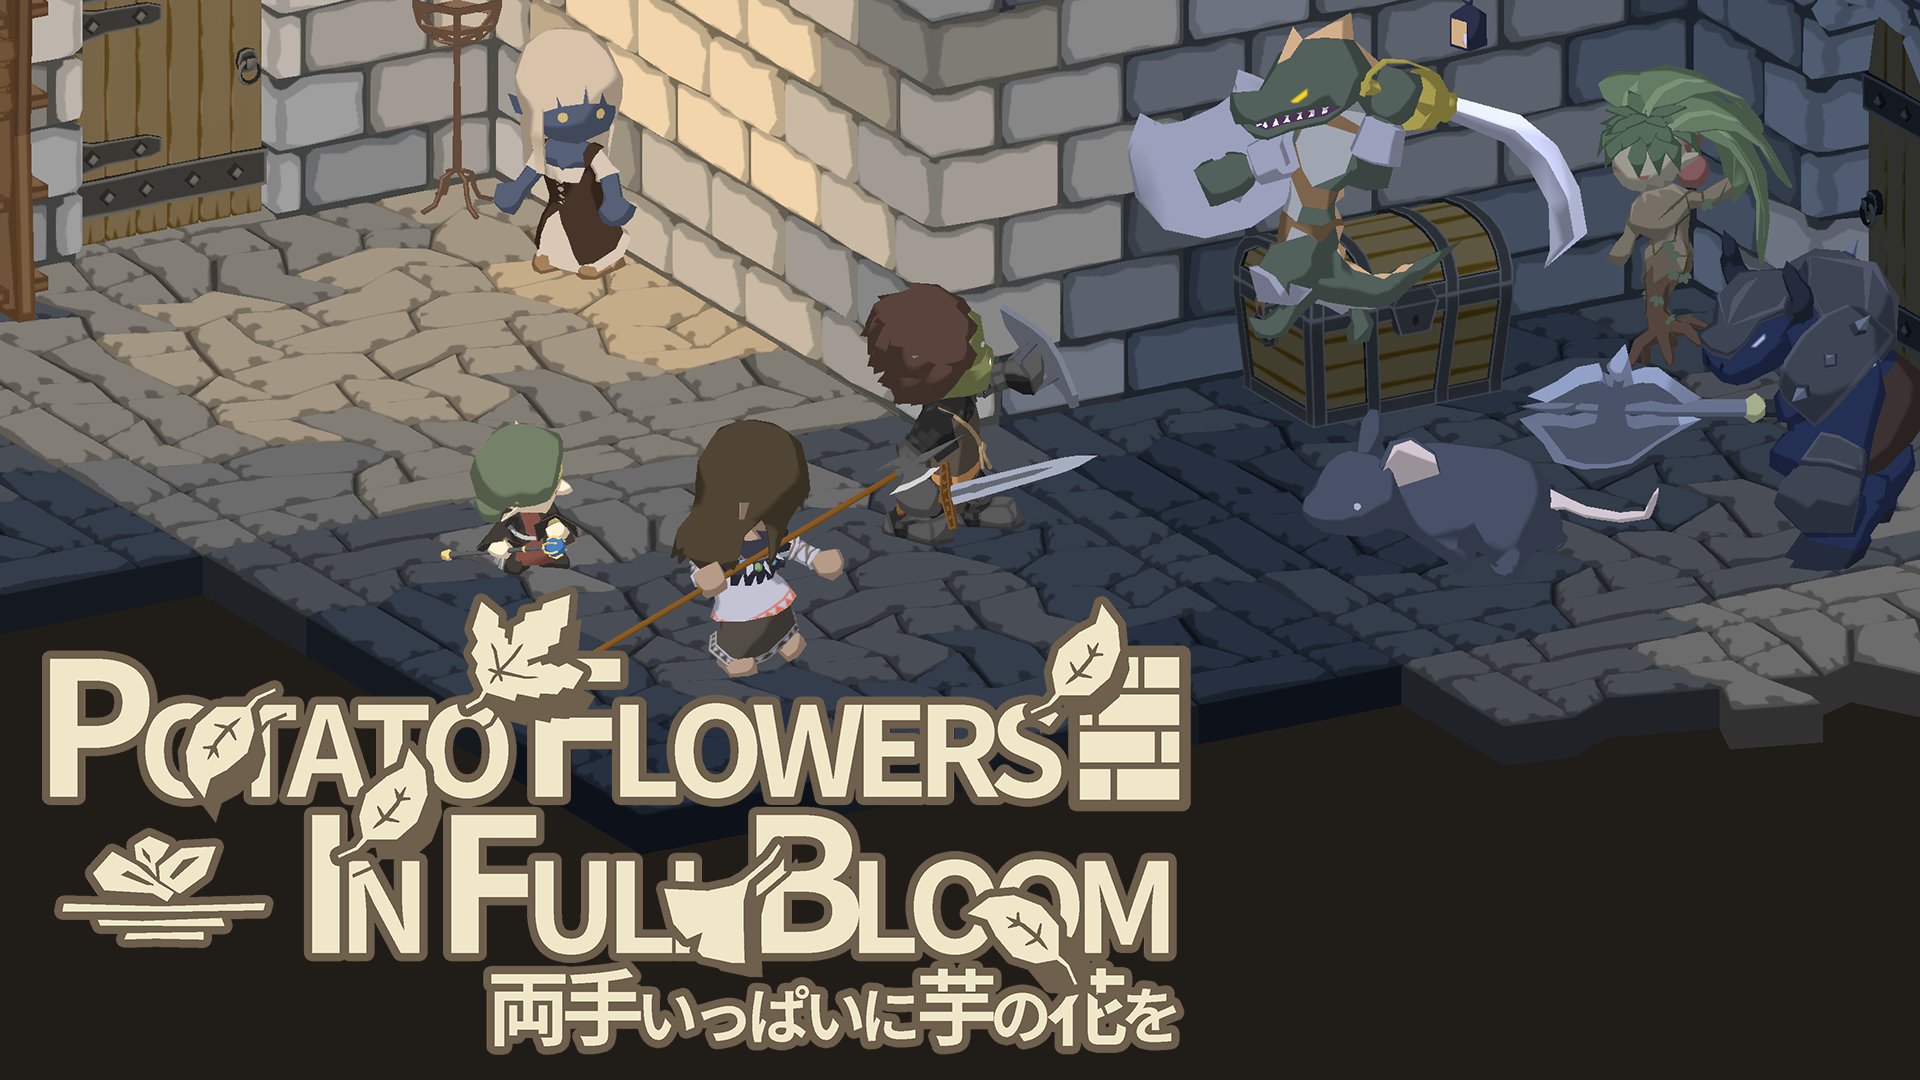 Potato Flowers in Full Bloom Coming in 2022, Demo Available Now!